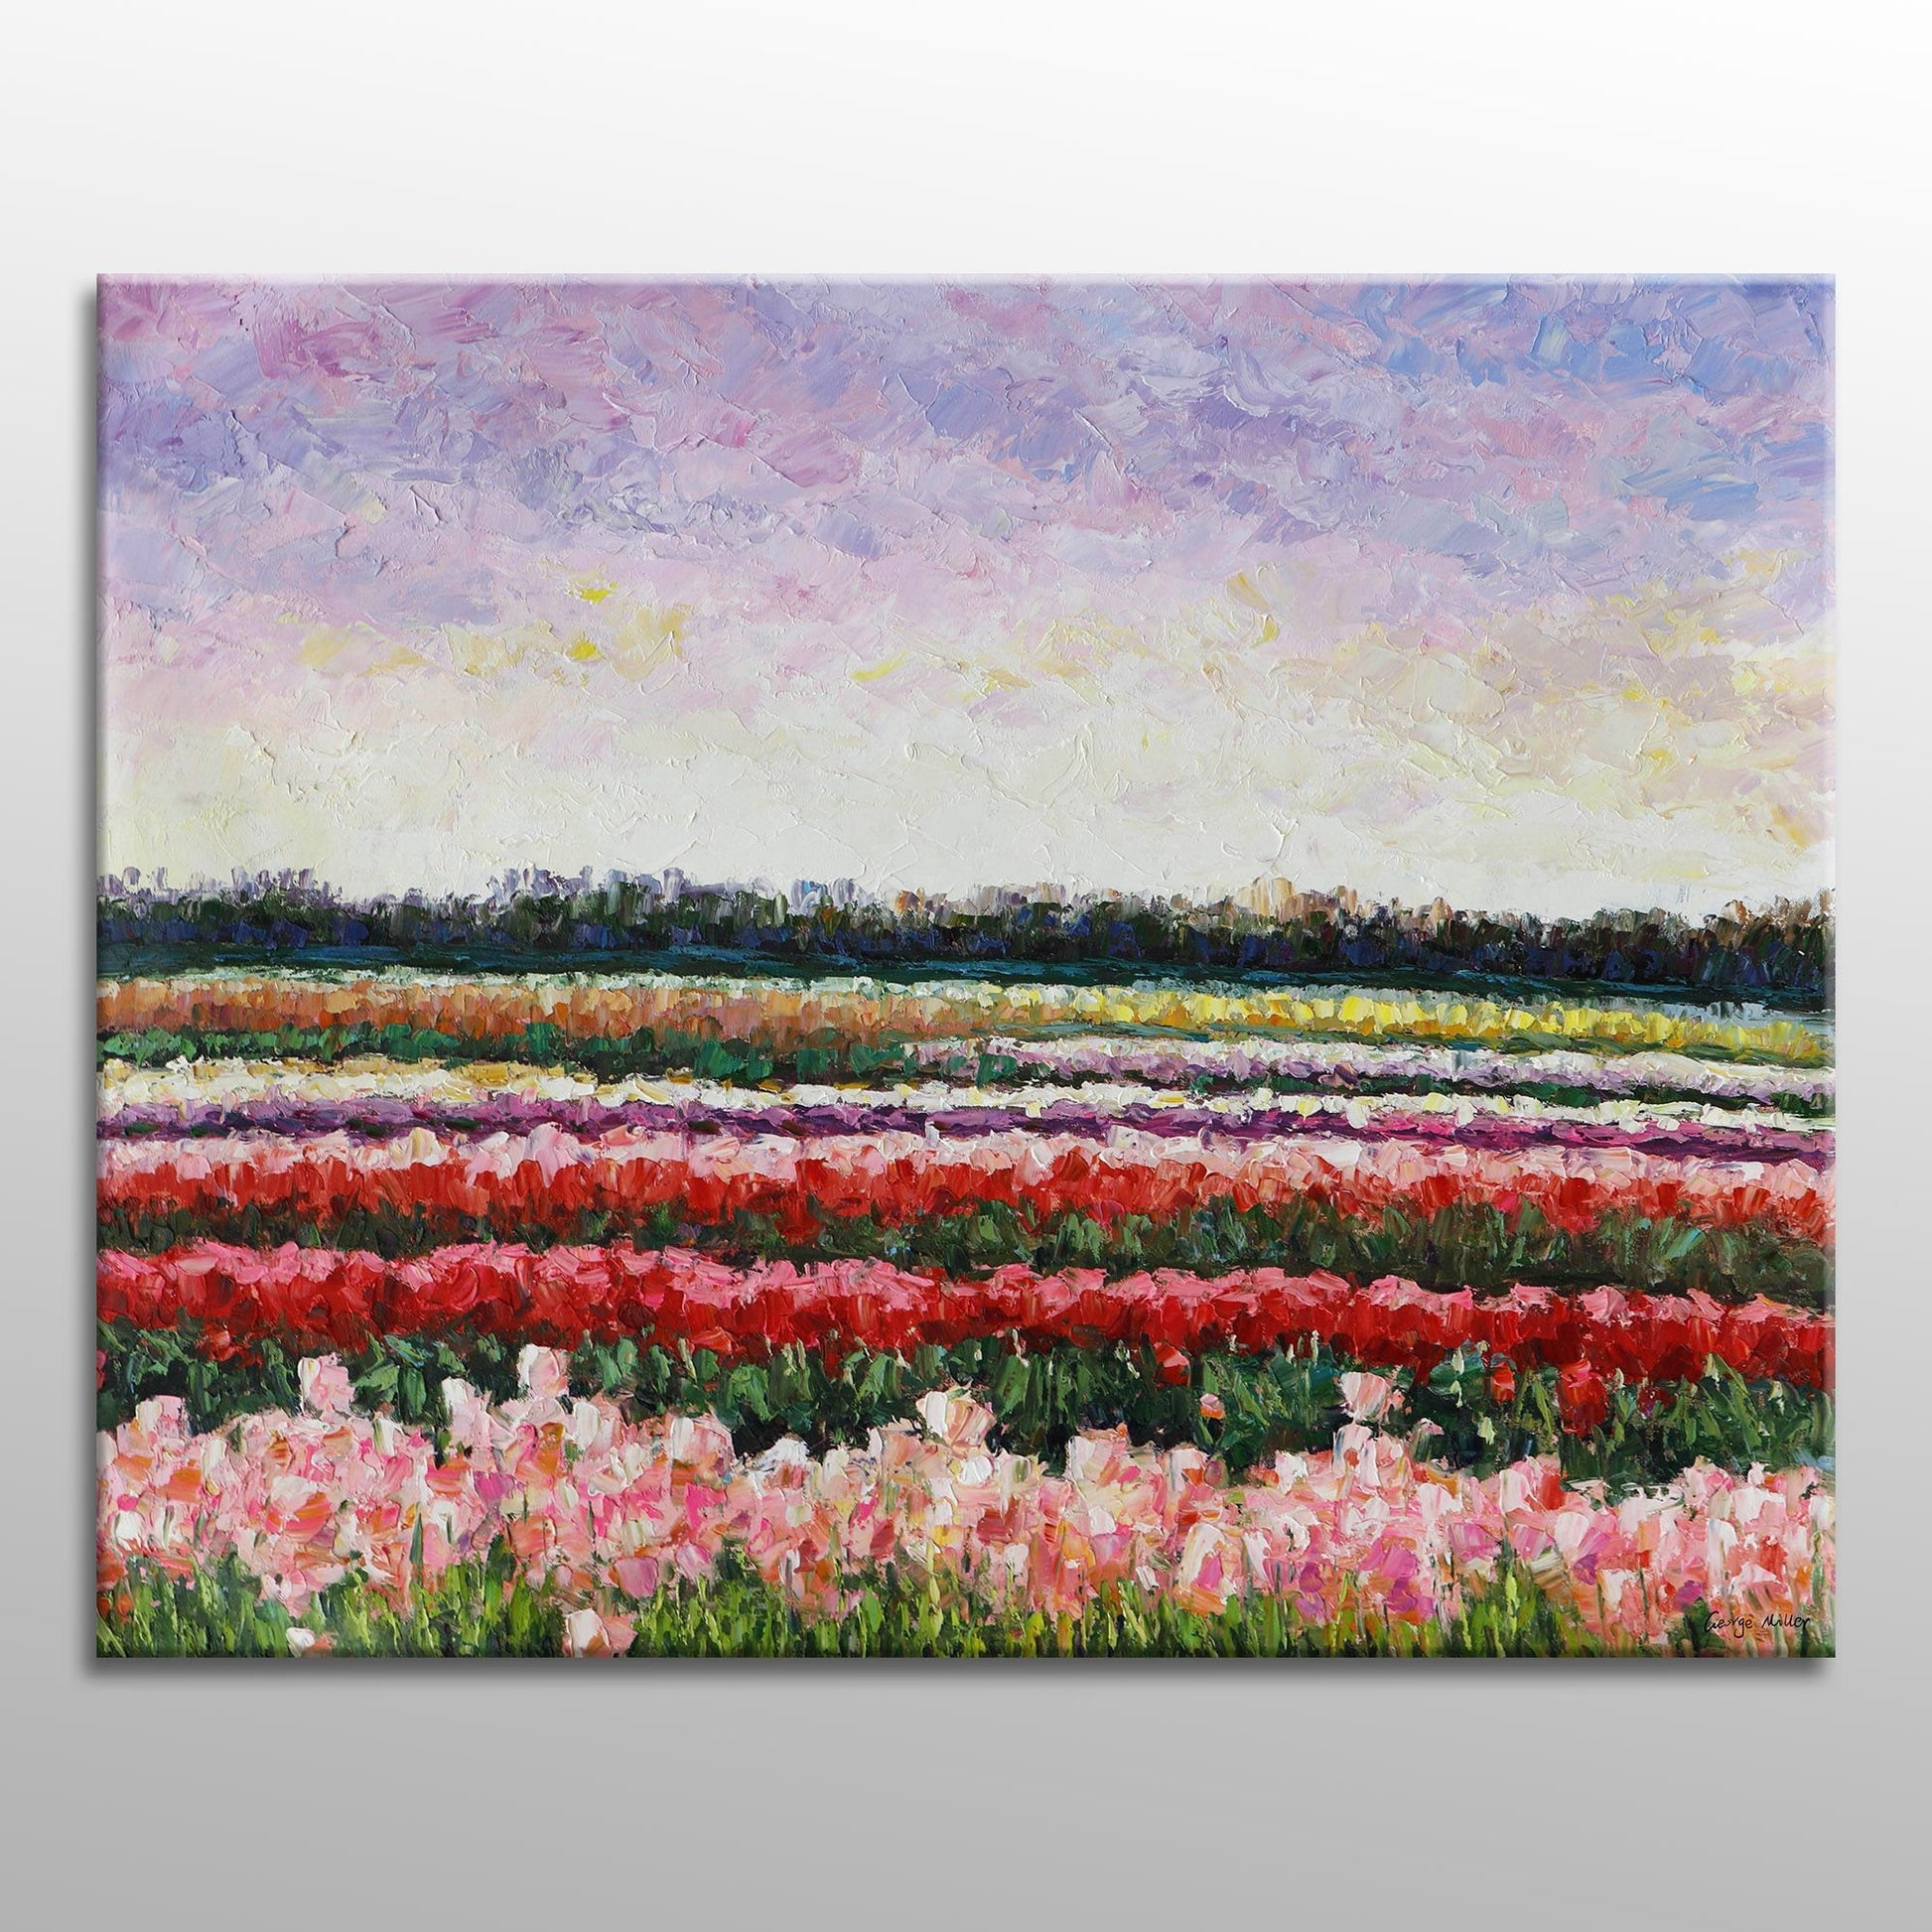 Experience the beauty of spring with our Landscape Oil Painting of Poppy Fields! Perfect for your home decor needs - Spring Decor Wall Art